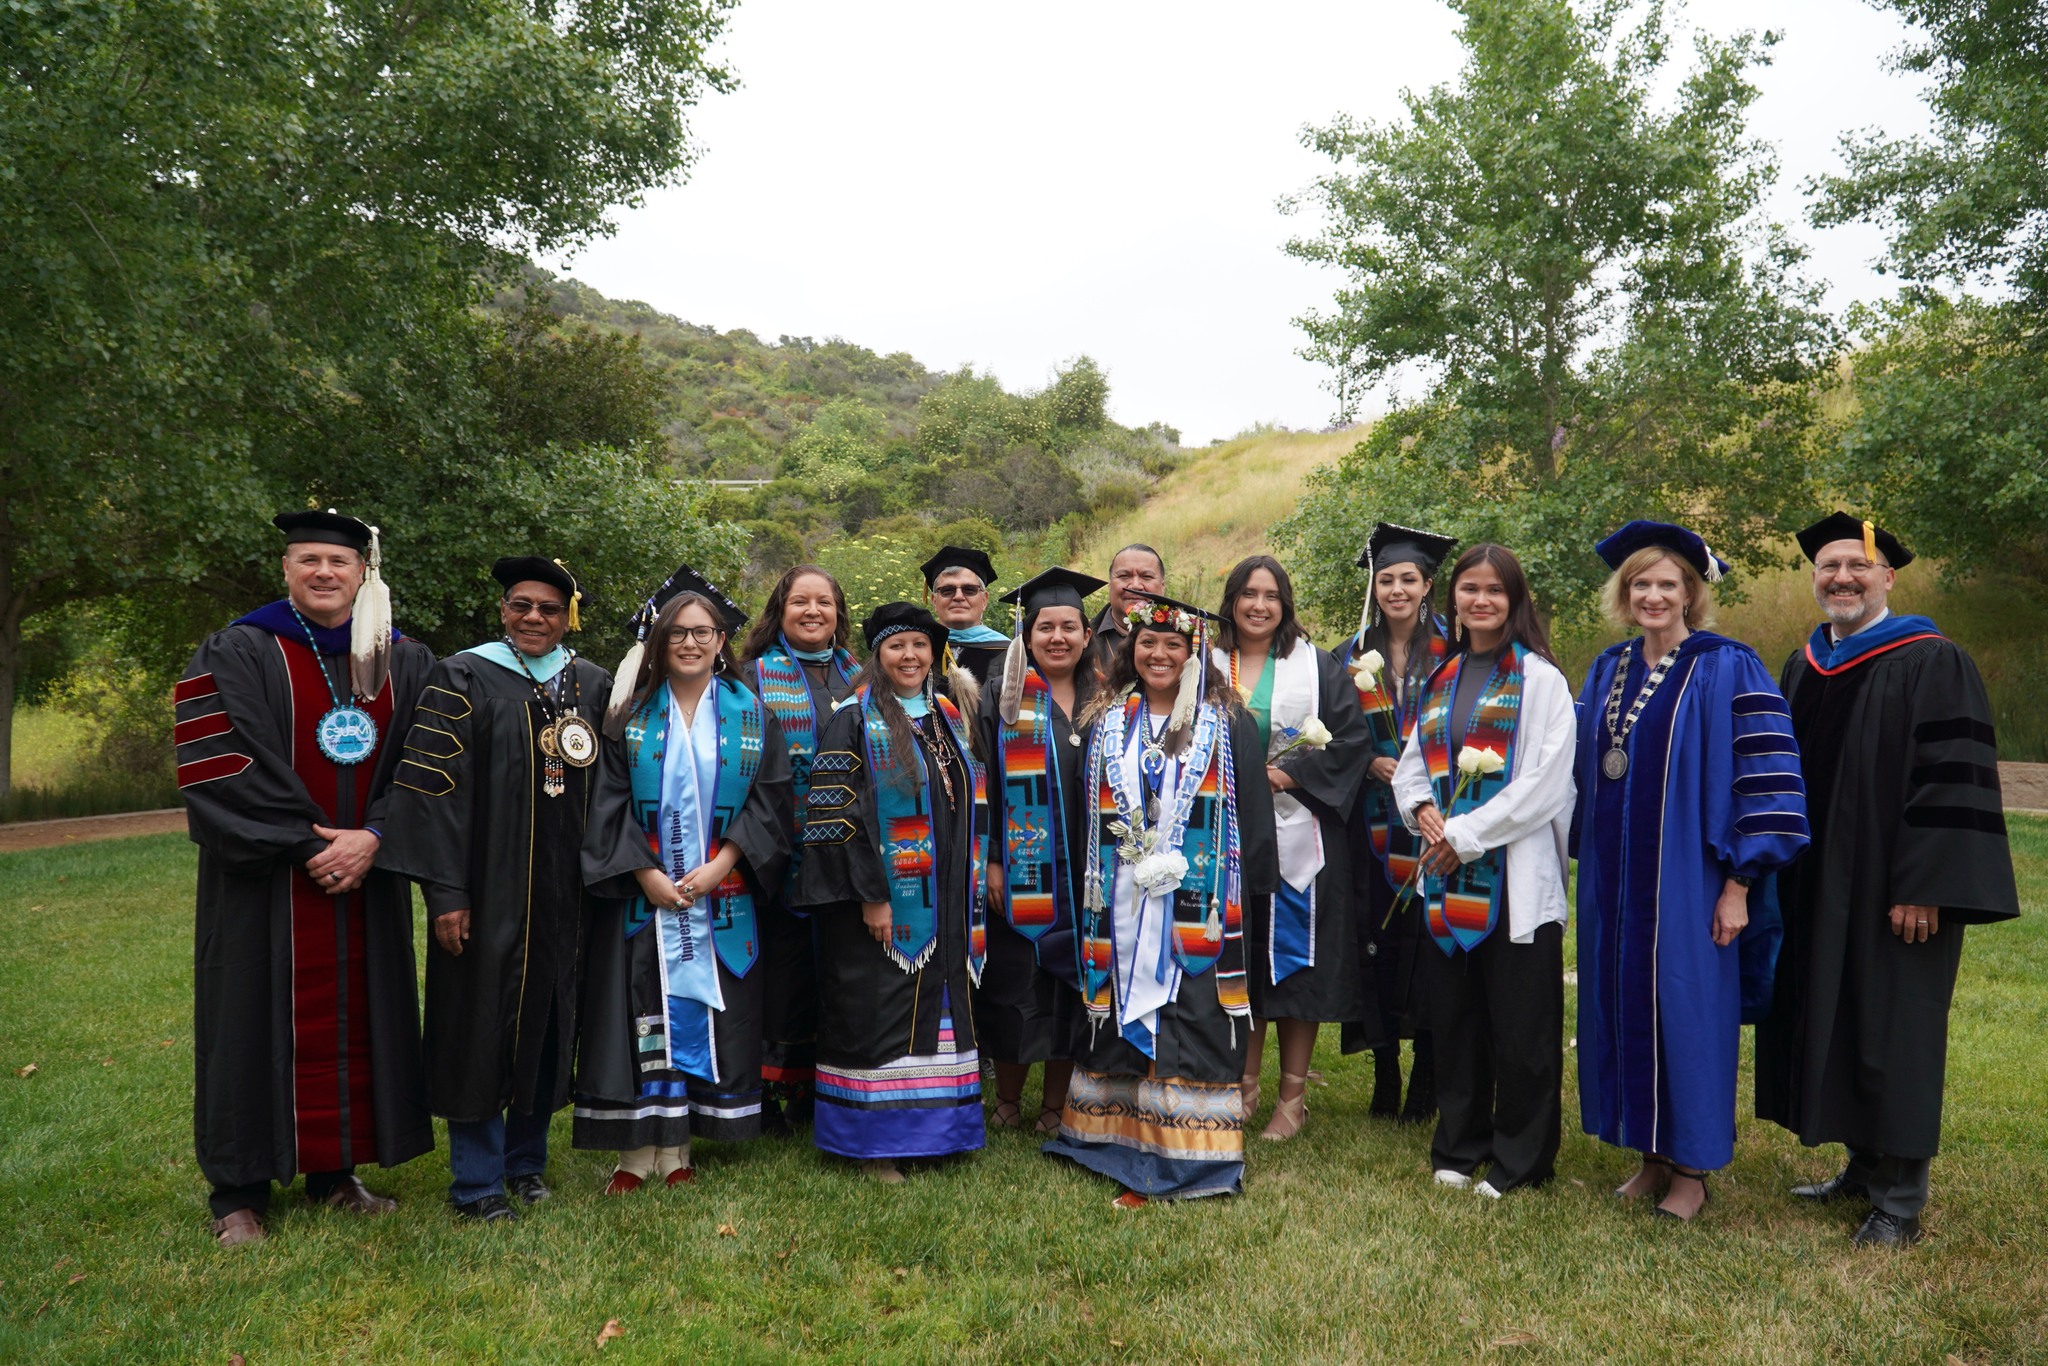 Group picture of American Indian graduates and faculty in their caps, gowns, and stoles, standing together outside in a green landscape of grass with trees and small hills in the background